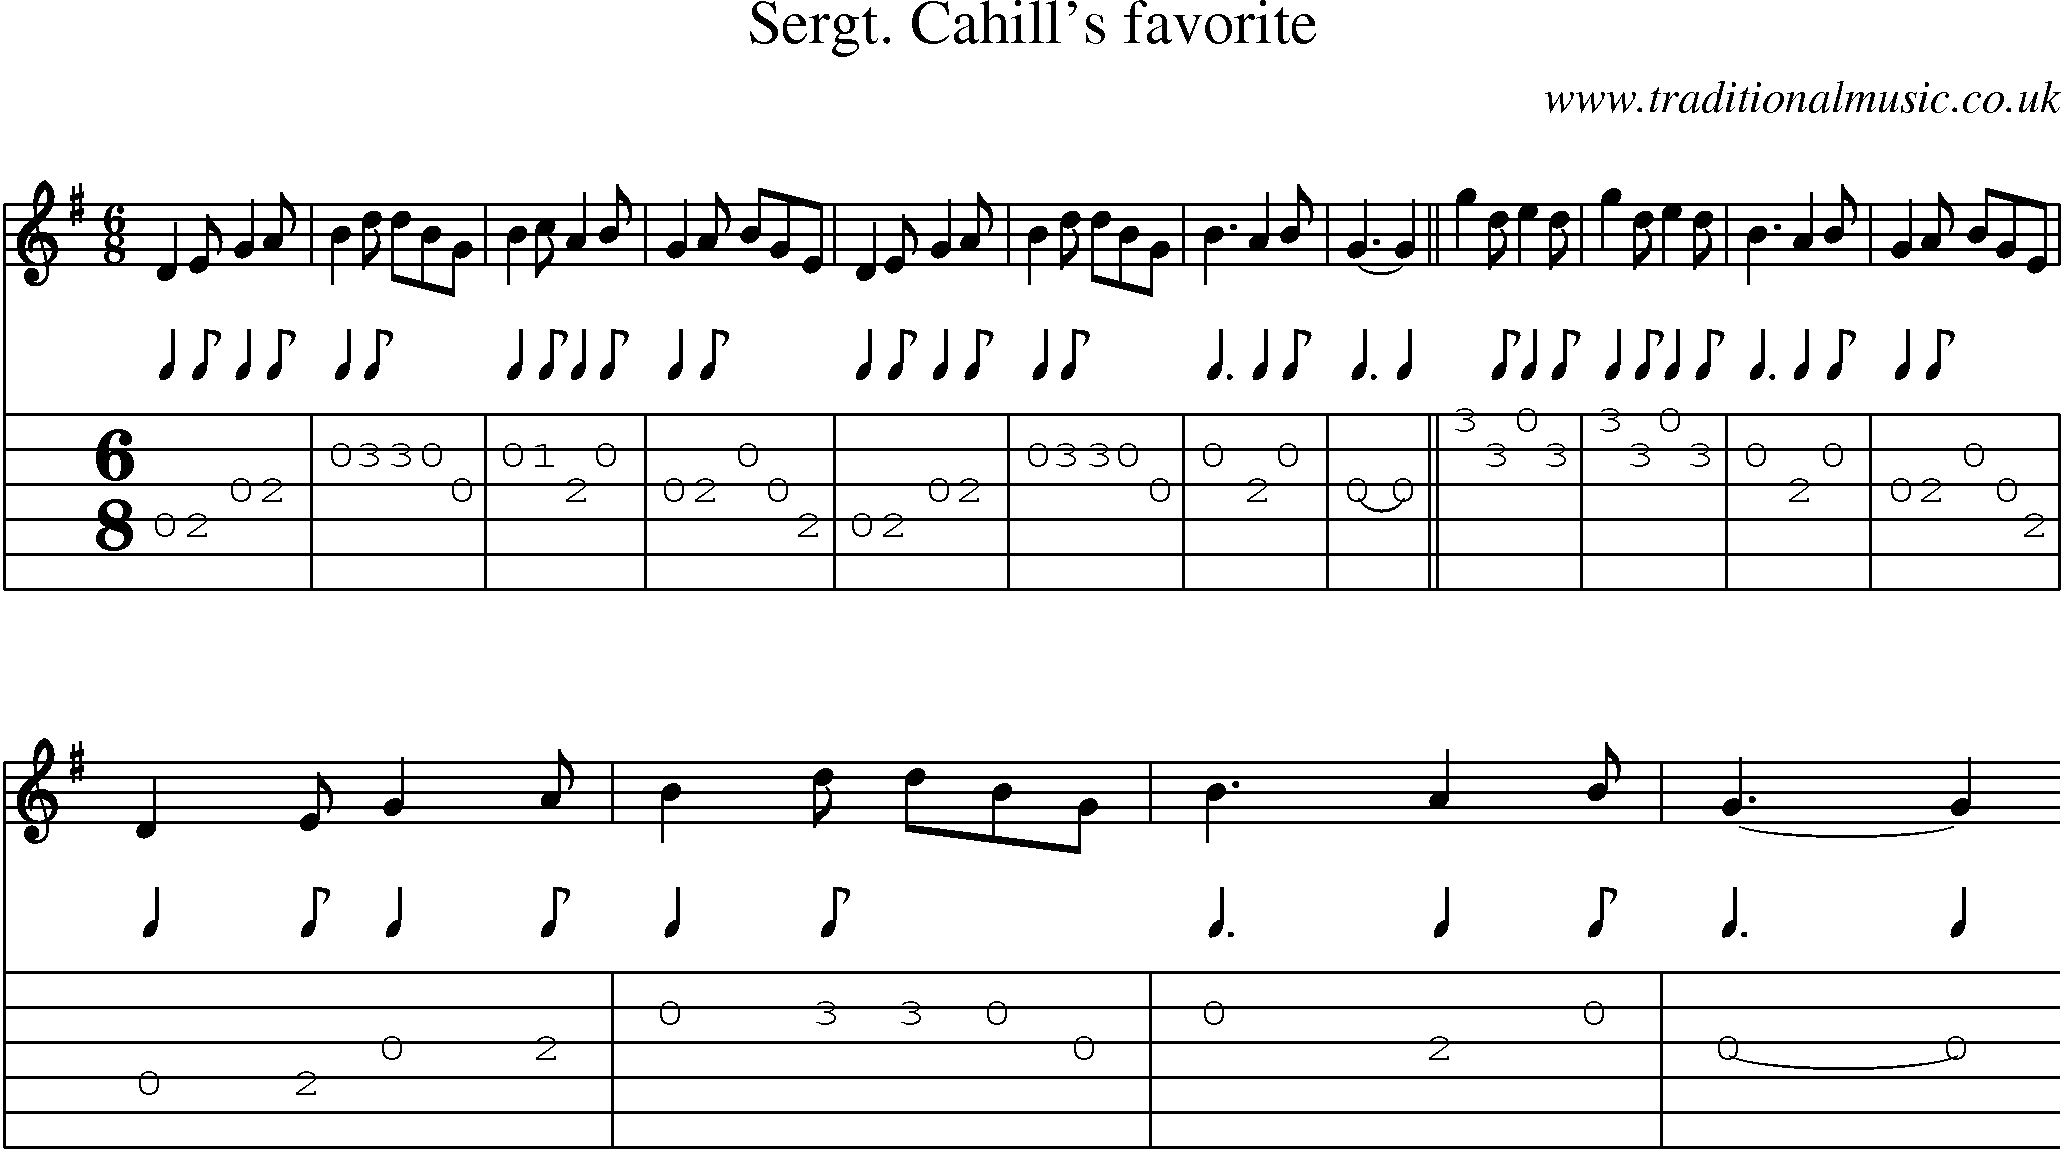 Music Score and Guitar Tabs for Sergt Cahills Favorite